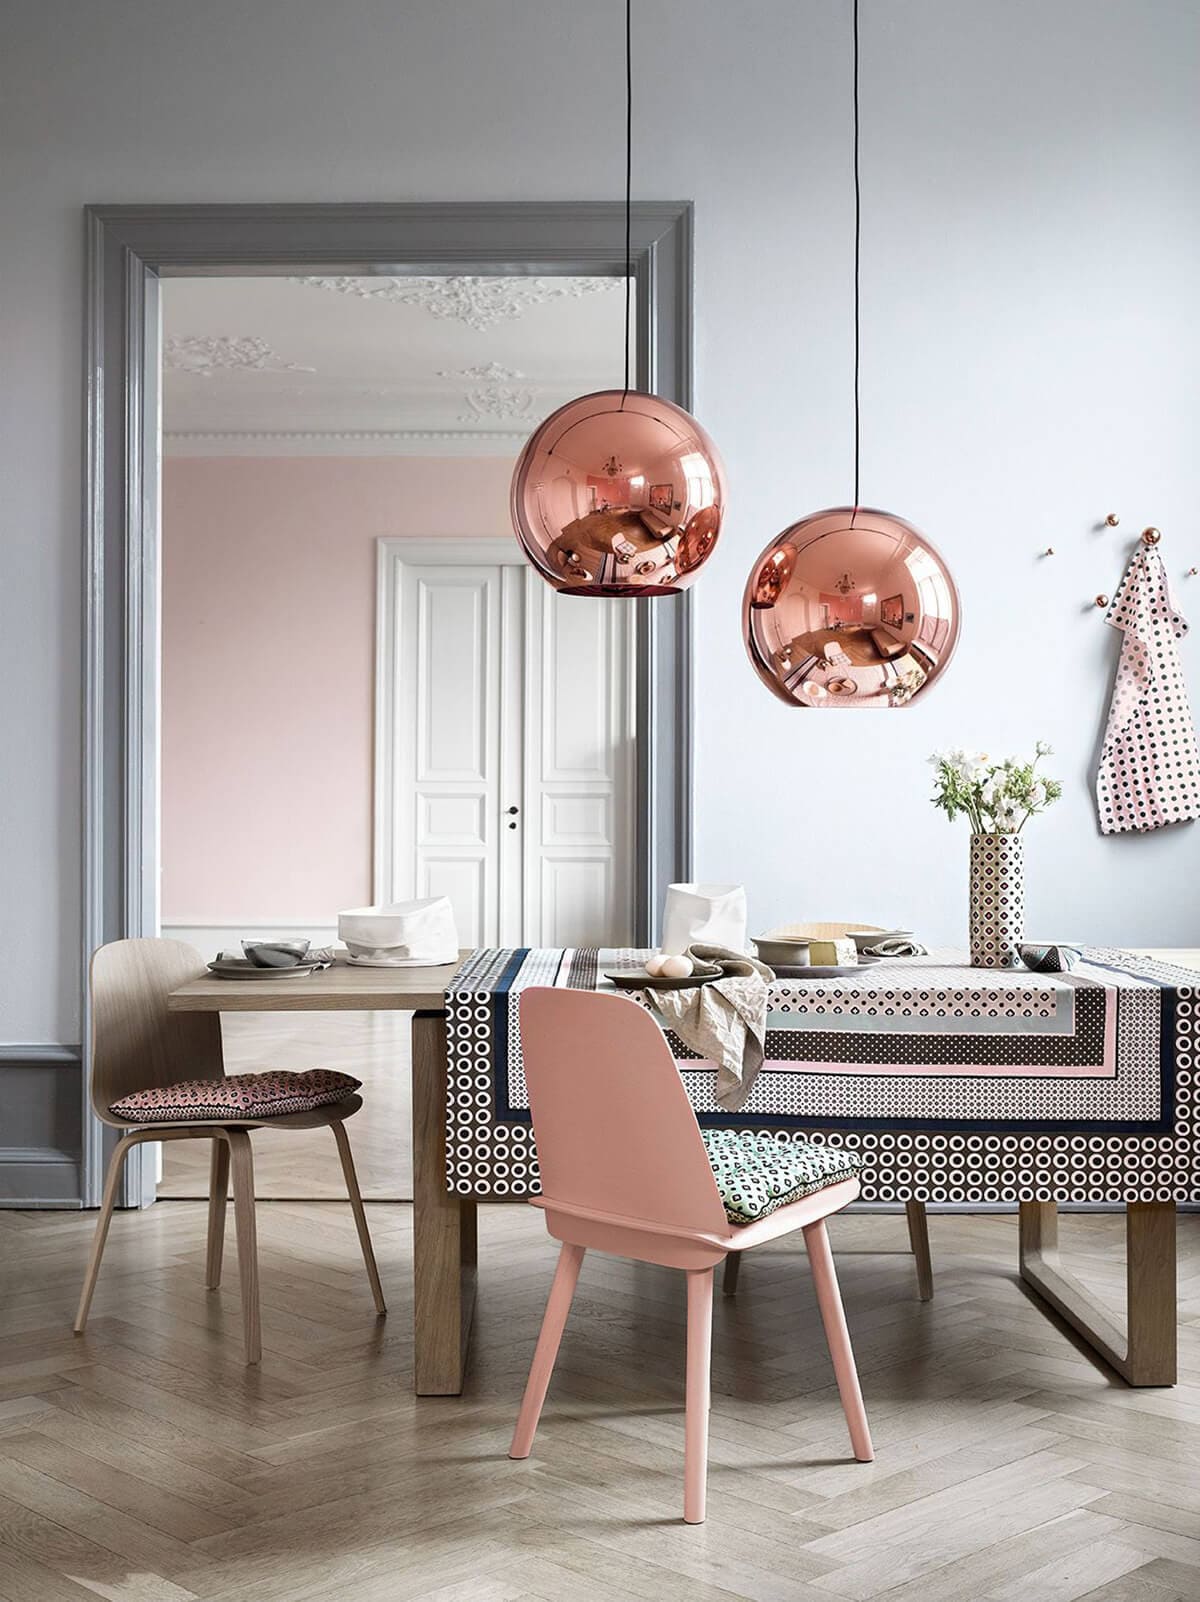 Stunning copper and blush ideas all girls will fall in love with - 83